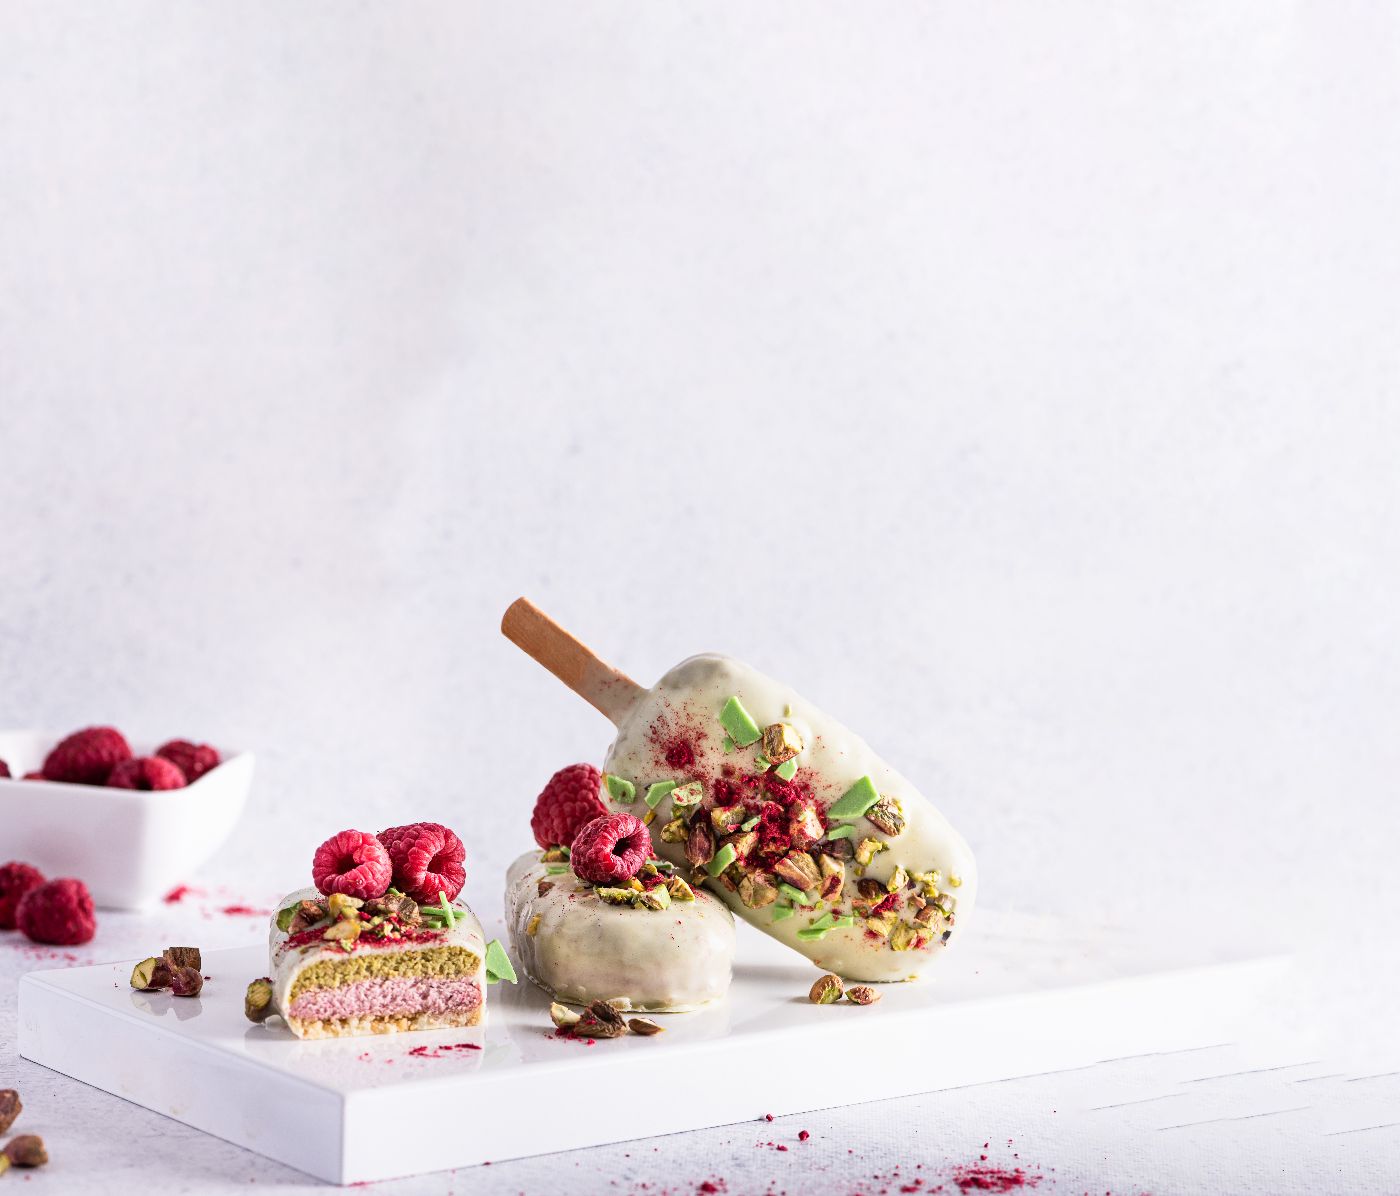 Ice-cream-sticks-with-white-chocolate-fruit-pistachios-and-colored-sugar-on-a-white-background.-1299642877_4378x3502_a3.jpg